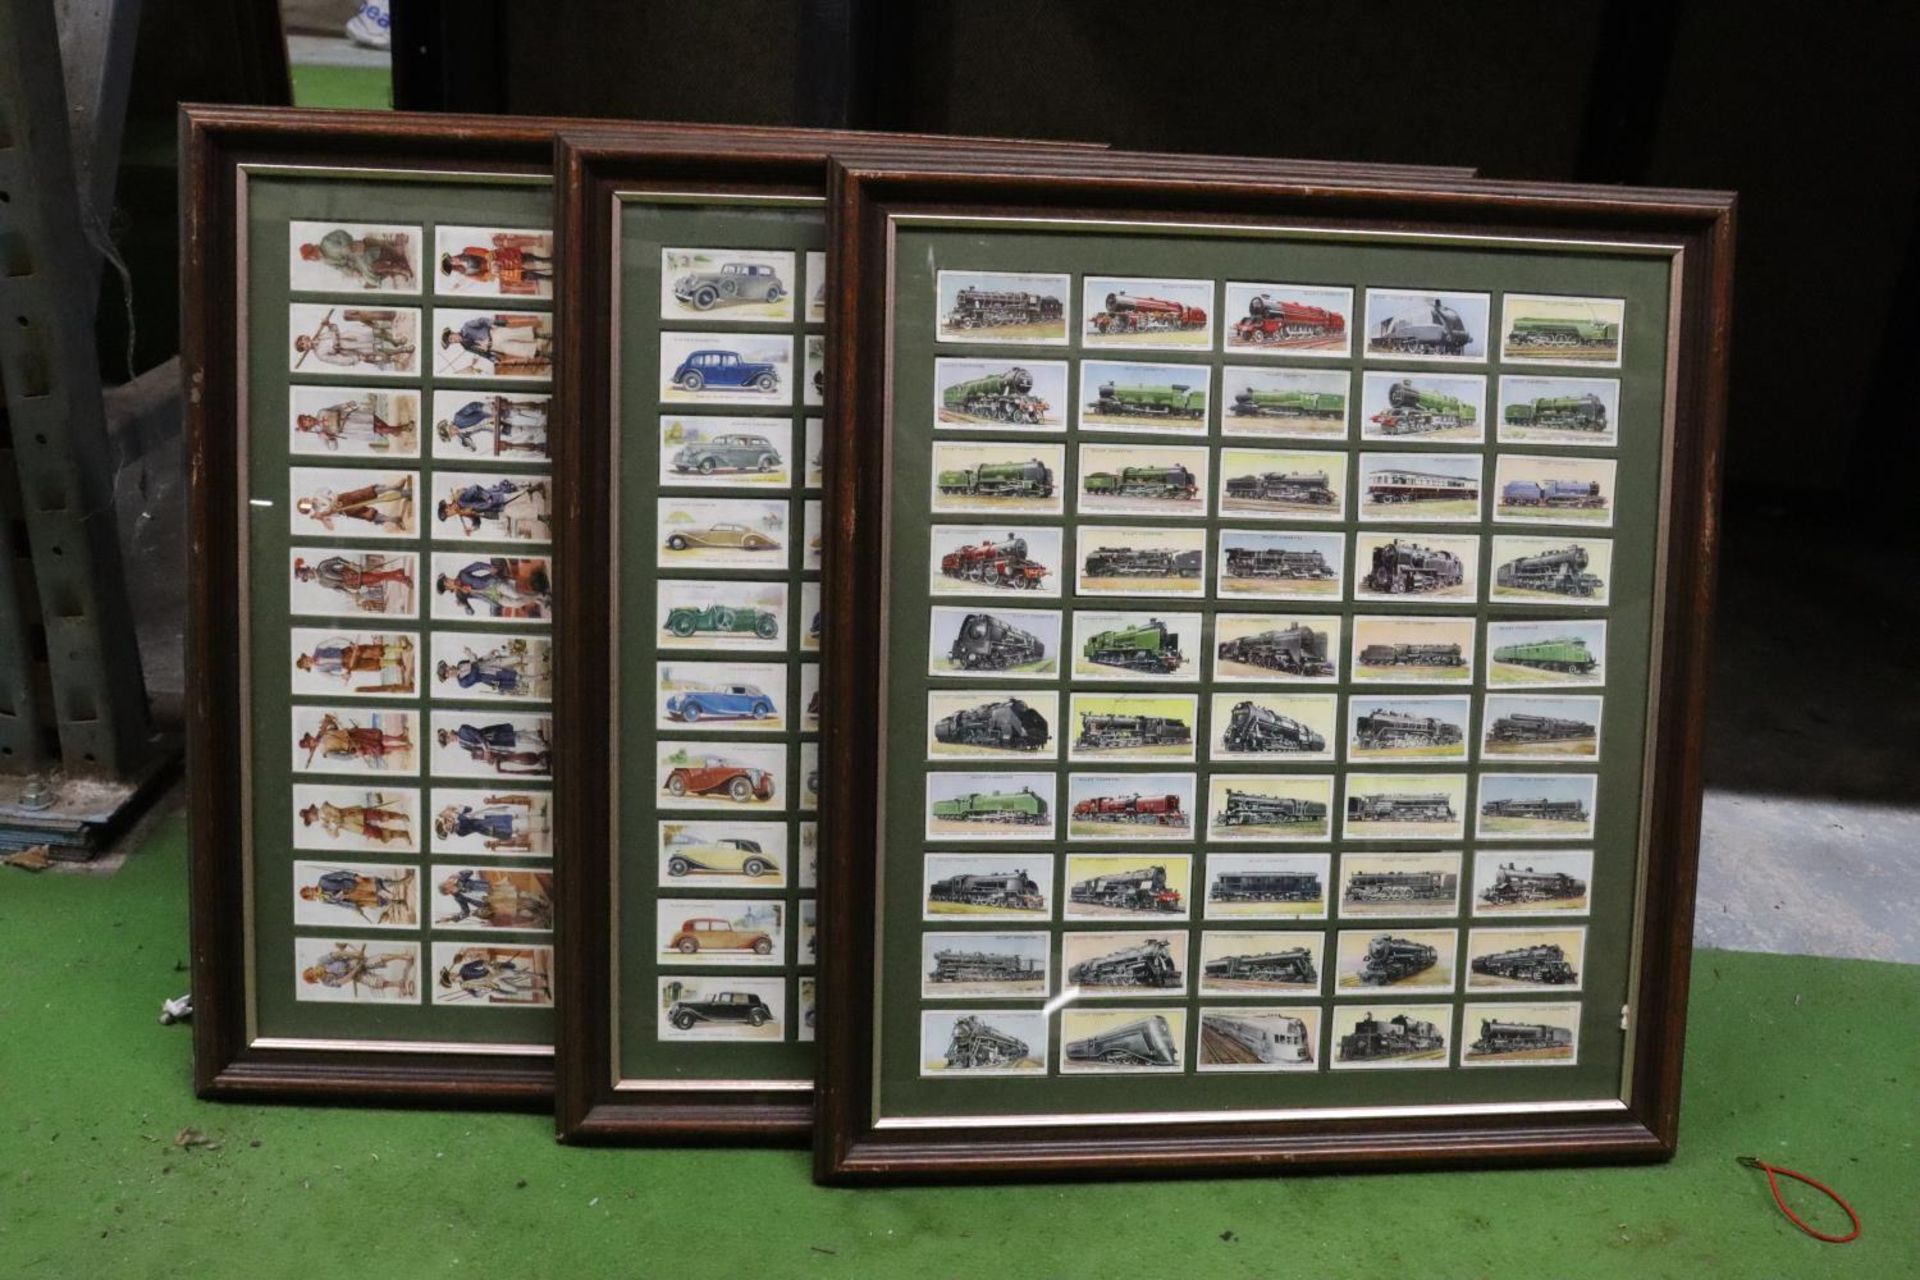 THREE FRAMED COLLECTIONS OF TRAINS, CARS AND NAVAL UNIFORMS